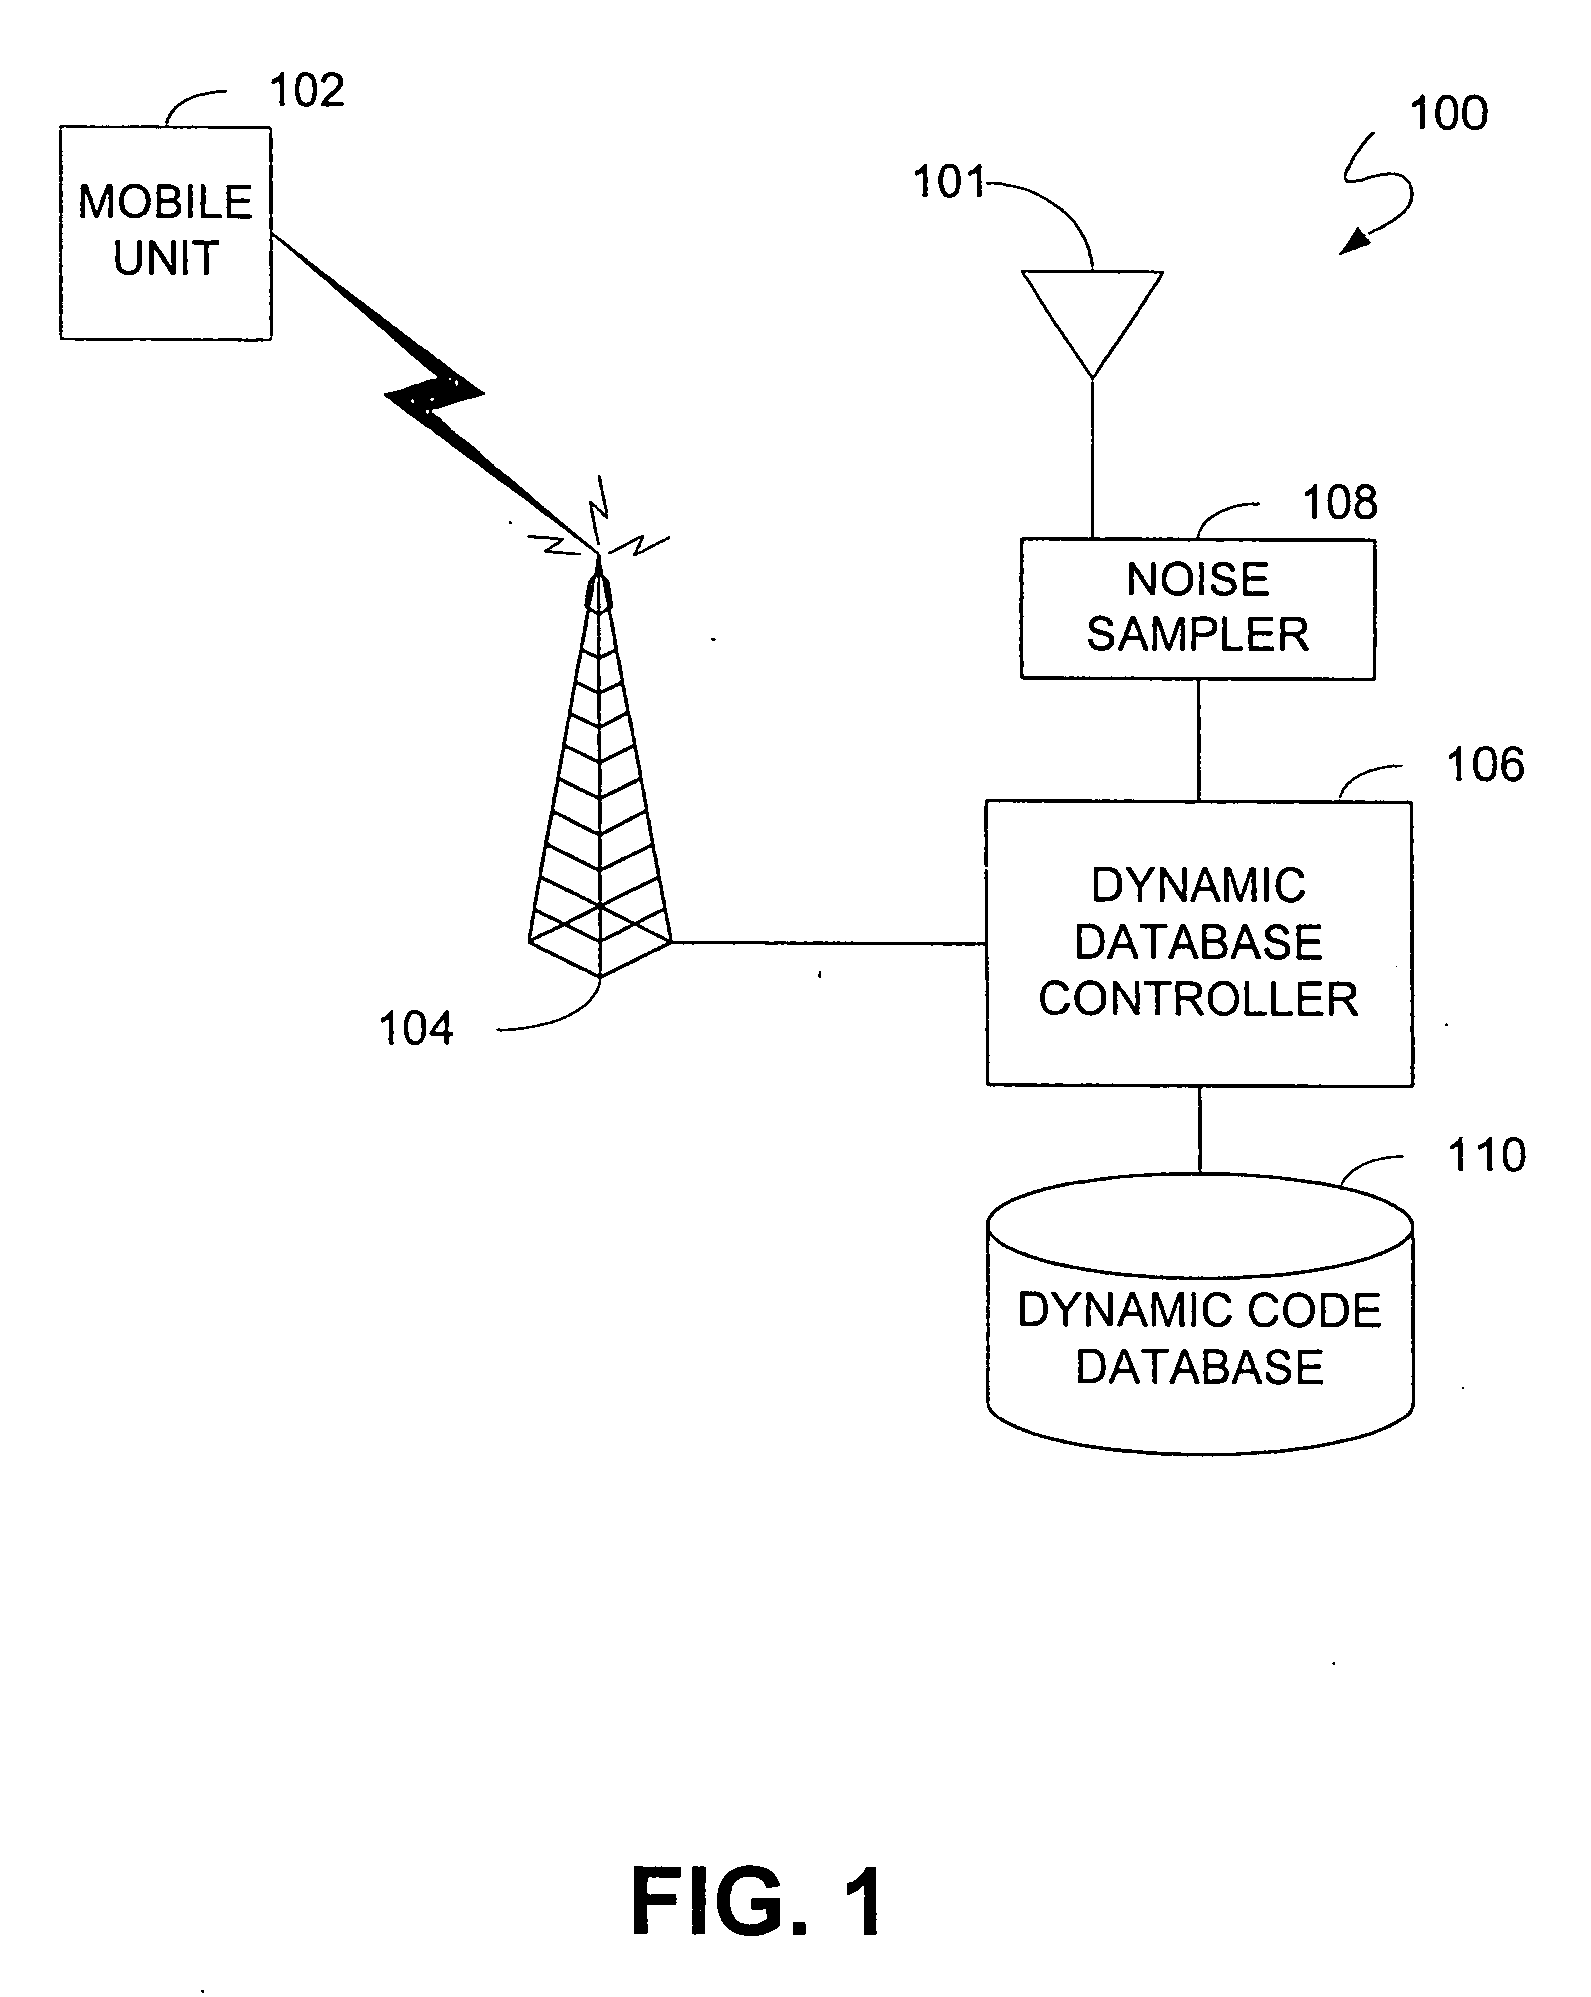 Mapping radio-frequency noise in an ultra-wideband communication system